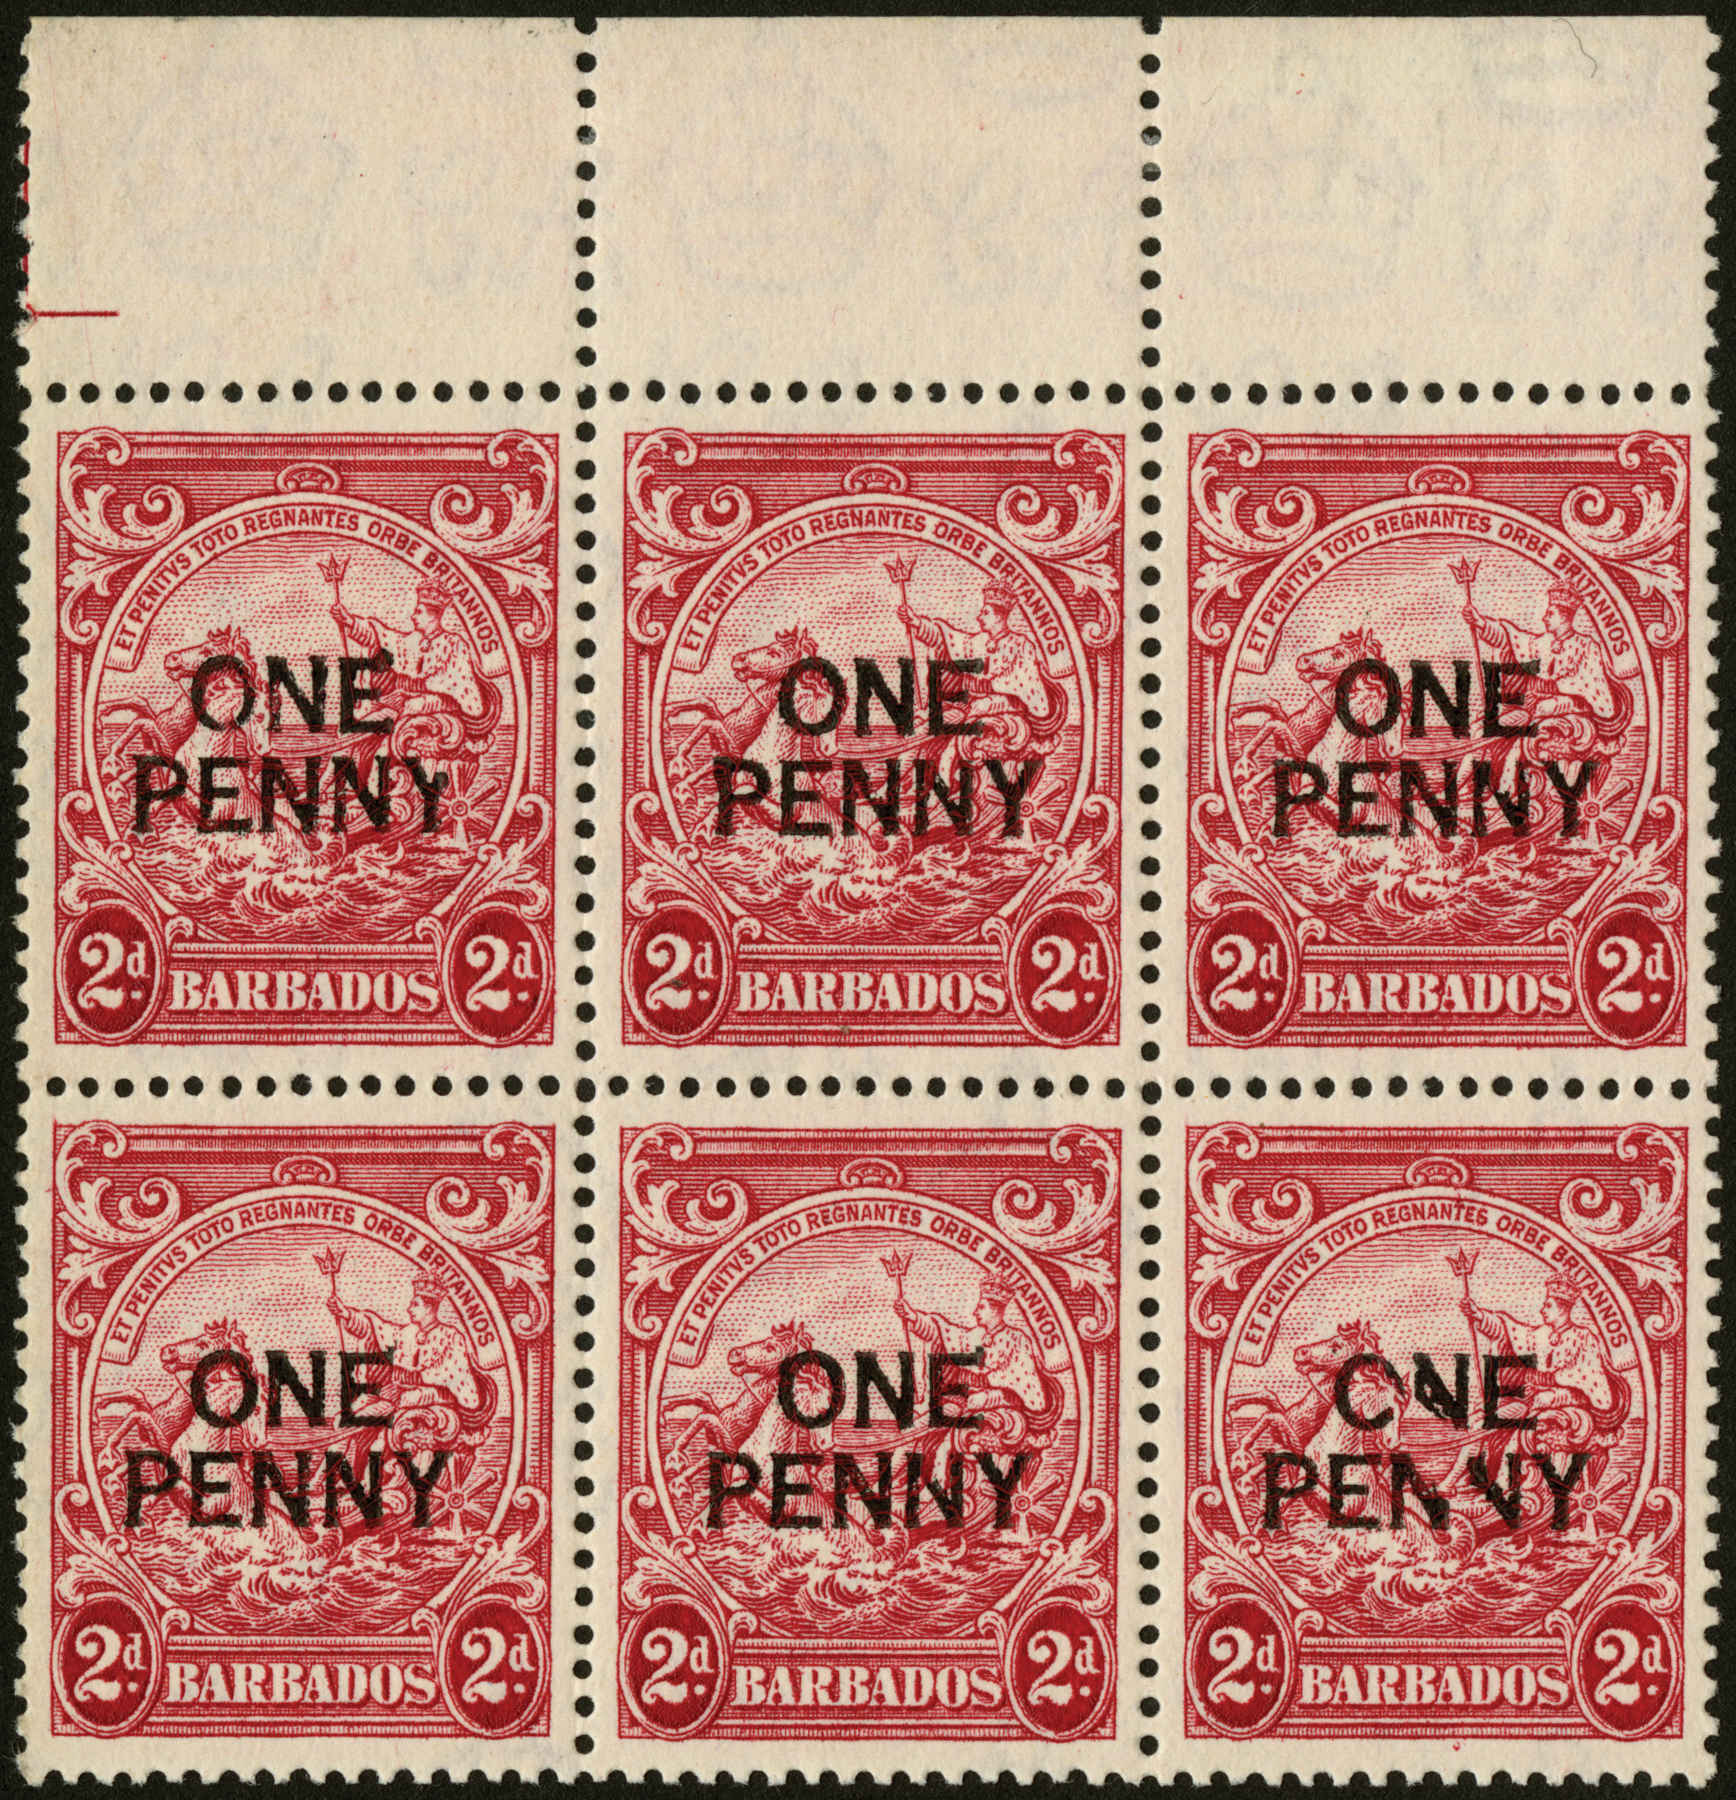 Barbados. 1947 1d on 2d perf 13½ x 13 mint positional block of six, R2/8 broken 'N's, hinged on